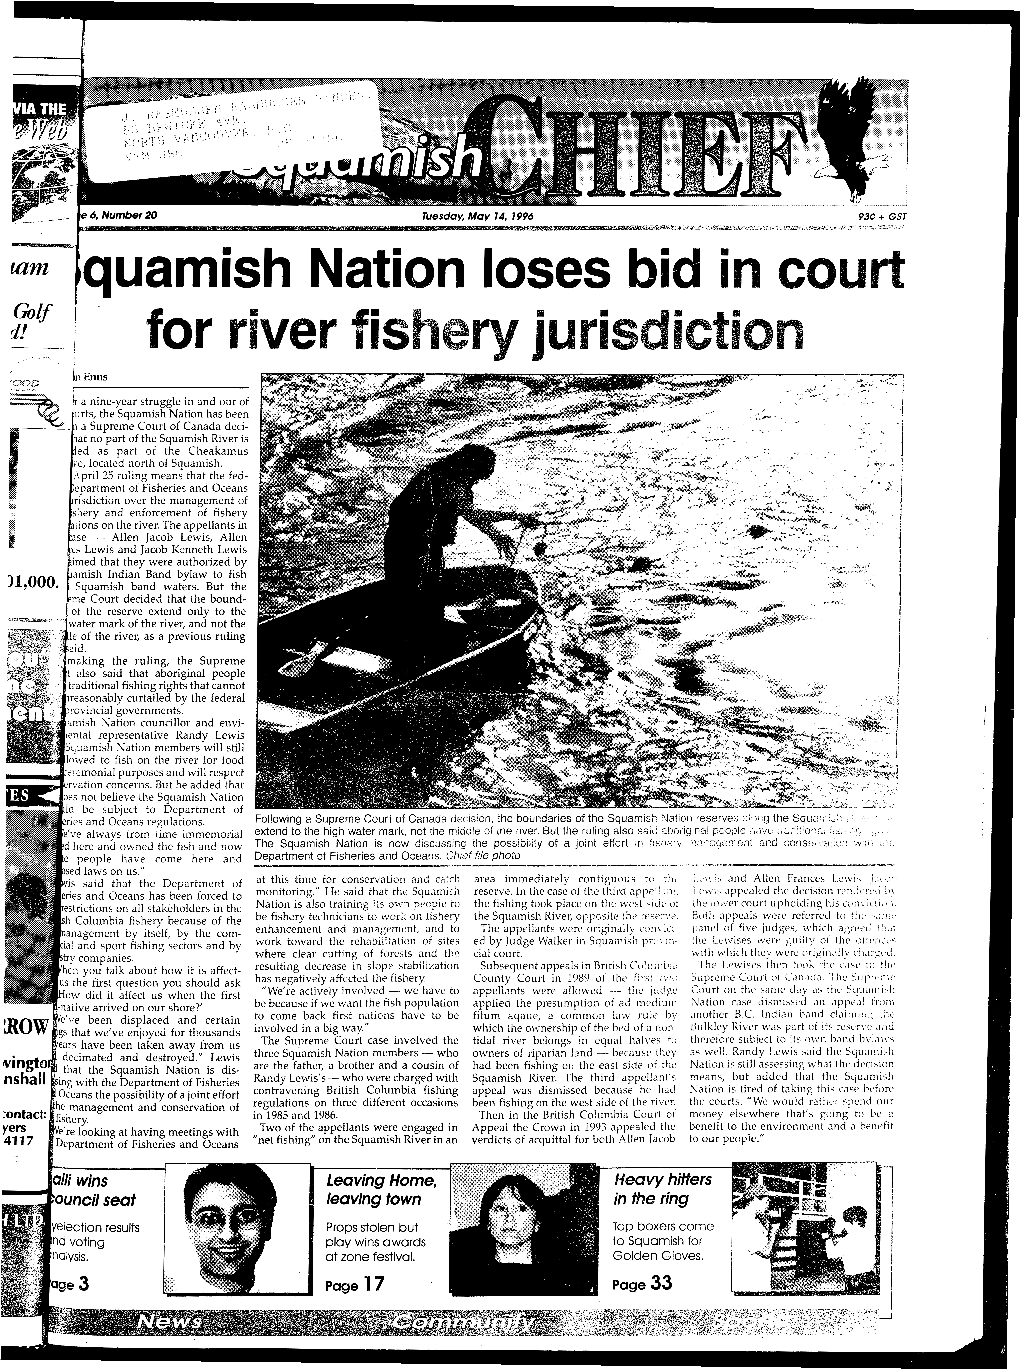 Squamish Nation Has Been a Supreme Court of Canada Deci- at 110 Part of the Squamish River Is Ed As Part of the Cheakamus \*E,Located North of Squamish